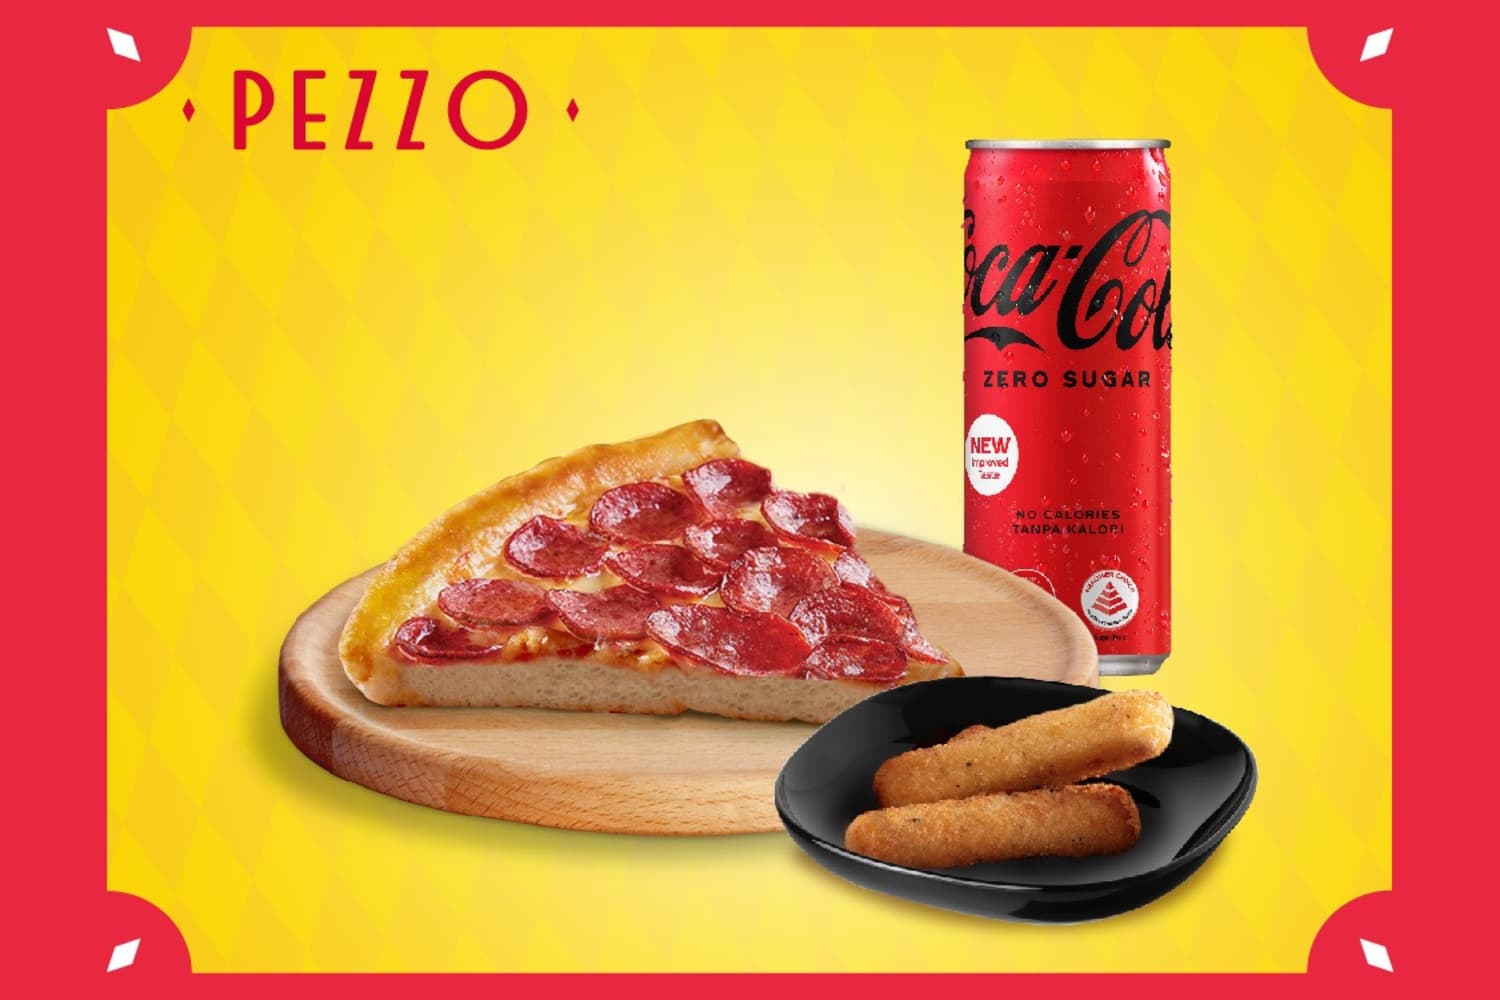 1 x Classic Slice Pizza + 2 x Cheese Sticks + 1 x Can of Coca-Cola Zero Sugar [Exclusive Deal] at Pezzo - Get Deals, Cashback and Rewards with ShopBack GO